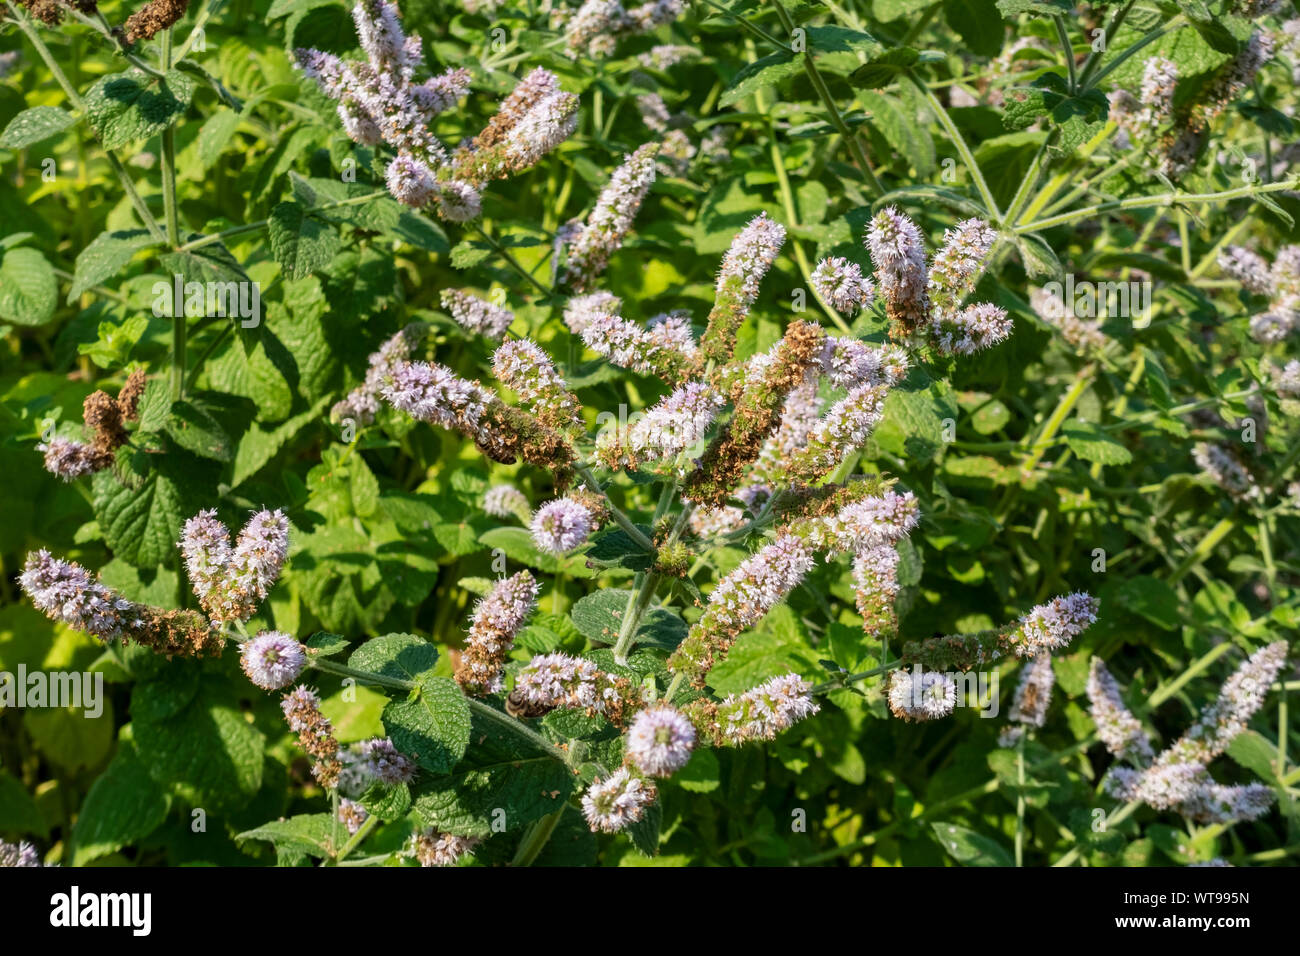 Close up of Apple mint (Mentha suaveolens) plant flower flowers flowering growing in a herb garden in summer England UK United Kingdom Great Britain Stock Photo